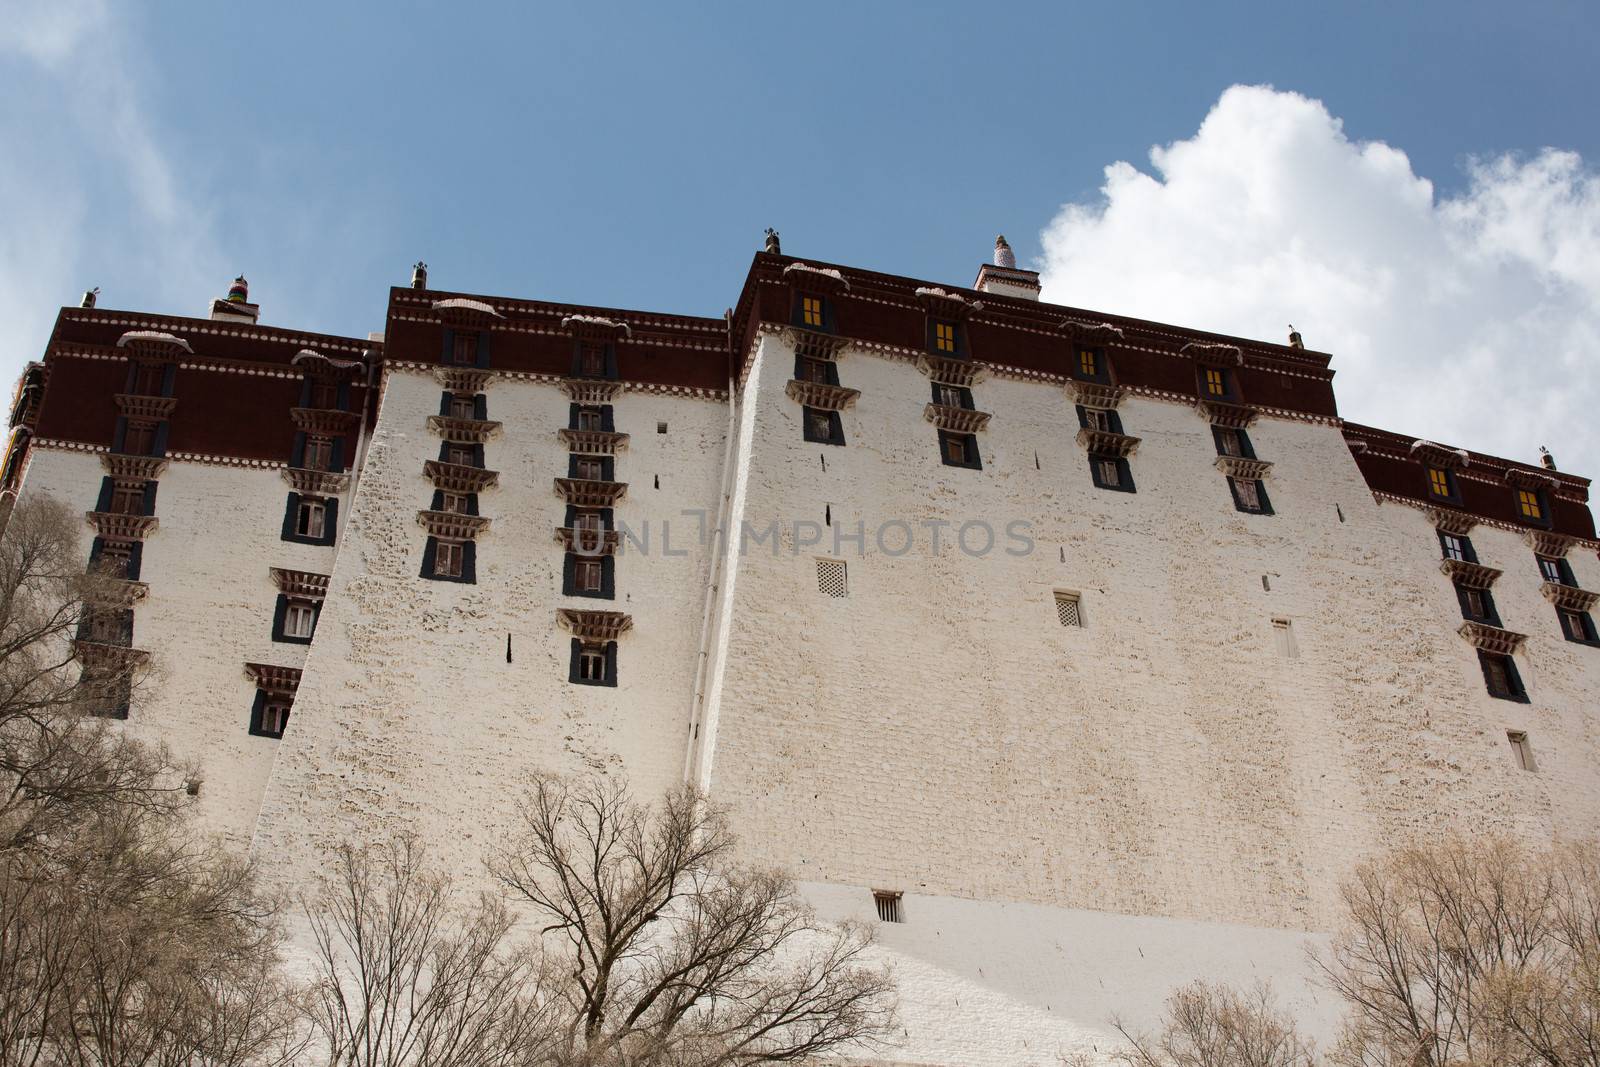 Back of the Potala Palace in Lhasa. Historic home of the Dalai Lama. A UNESCO World Heritage site. China 2013